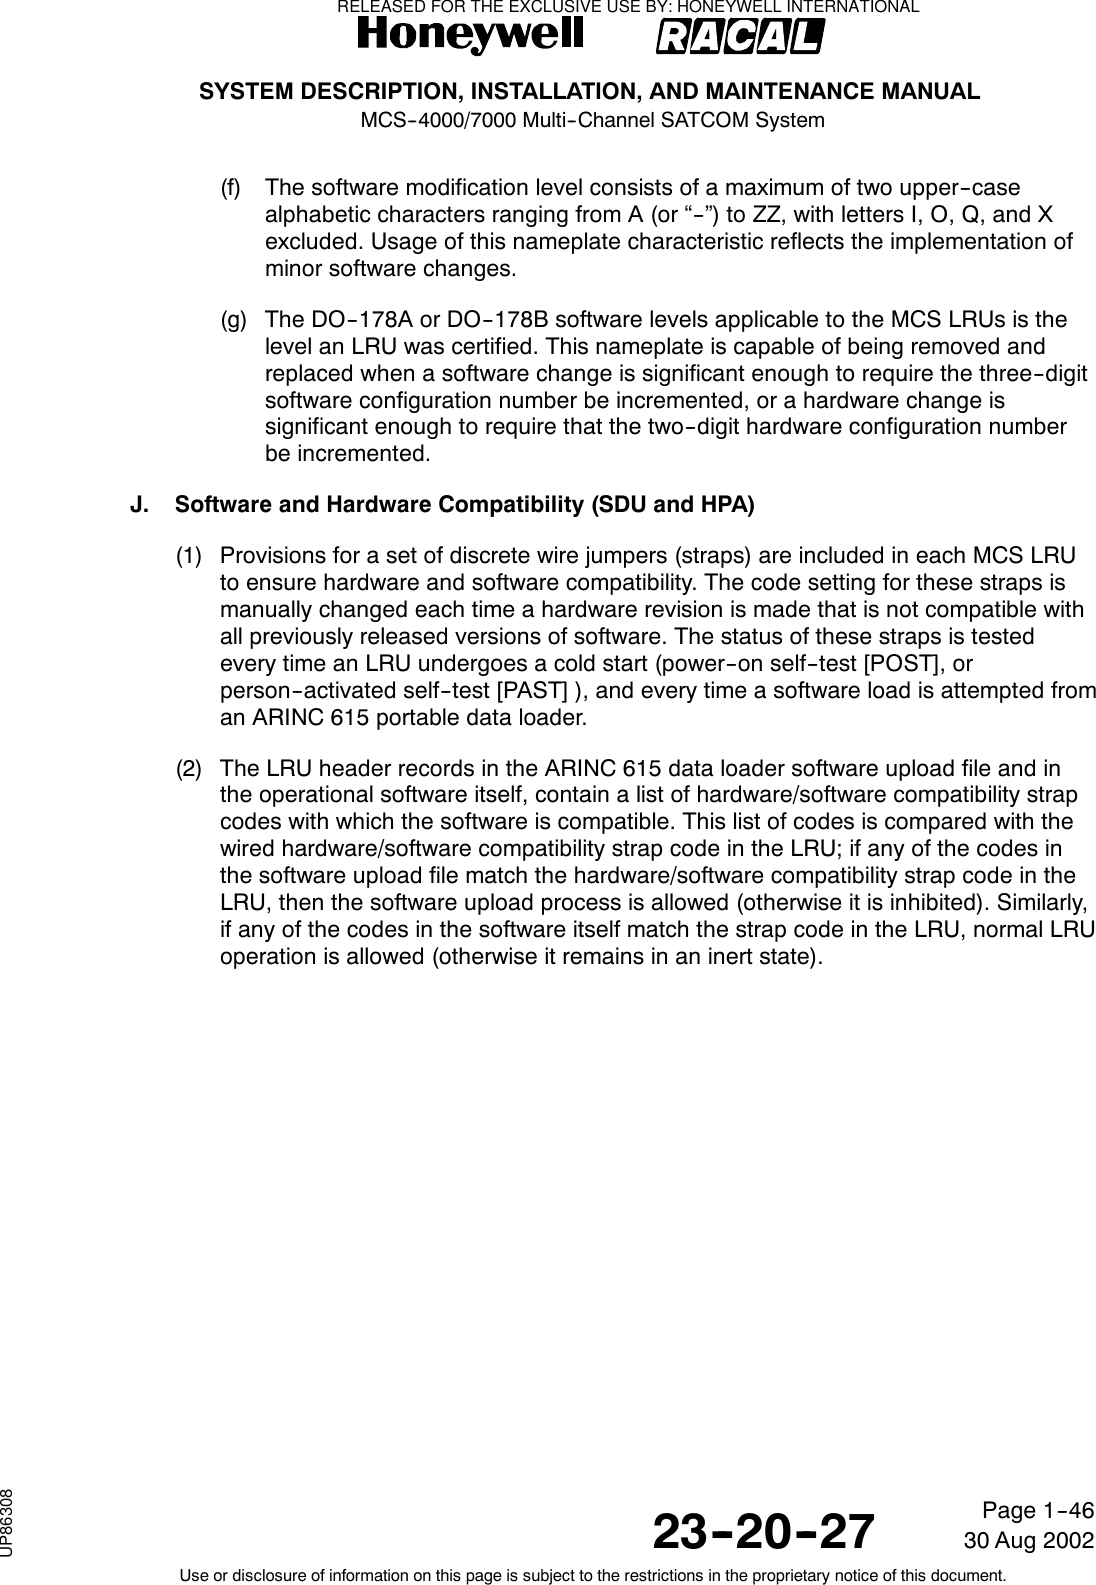 SYSTEM DESCRIPTION, INSTALLATION, AND MAINTENANCE MANUALMCS--4000/7000 Multi--Channel SATCOM System23--20--2730 Aug 2002Use or disclosure of information on this page is subject to the restrictions in the proprietary notice of this document.Page 1--46(f) The software modification level consists of a maximum of two upper--casealphabetic characters ranging from A (or “--”) to ZZ, with letters I, O, Q, and Xexcluded. Usage of this nameplate characteristic reflects the implementation ofminor software changes.(g) The DO--178A or DO--178B software levels applicable to the MCS LRUs is thelevel an LRU was certified. This nameplate is capable of being removed andreplaced when a software change is significant enough to require the three--digitsoftware configuration number be incremented, or a hardware change issignificant enough to require that the two--digit hardware configuration numberbe incremented.J. Software and Hardware Compatibility (SDU and HPA)(1) Provisions for a set of discrete wire jumpers (straps) are included in each MCS LRUto ensure hardware and software compatibility. The code setting for these straps ismanually changed each time a hardware revision is made that is not compatible withall previously released versions of software. The status of these straps is testedevery time an LRU undergoes a cold start (power--on self--test [POST], orperson--activated self--test [PAST] ), and every time a software load is attempted froman ARINC 615 portable data loader.(2) The LRU header records in the ARINC 615 data loader software upload file and inthe operational software itself, contain a list of hardware/software compatibility strapcodes with which the software is compatible. This list of codes is compared with thewired hardware/software compatibility strap code in the LRU; if any of the codes inthe software upload file match the hardware/software compatibility strap code in theLRU, then the software upload process is allowed (otherwise it is inhibited). Similarly,if any of the codes in the software itself match the strap code in the LRU, normal LRUoperation is allowed (otherwise it remains in an inert state).RELEASED FOR THE EXCLUSIVE USE BY: HONEYWELL INTERNATIONALUP86308